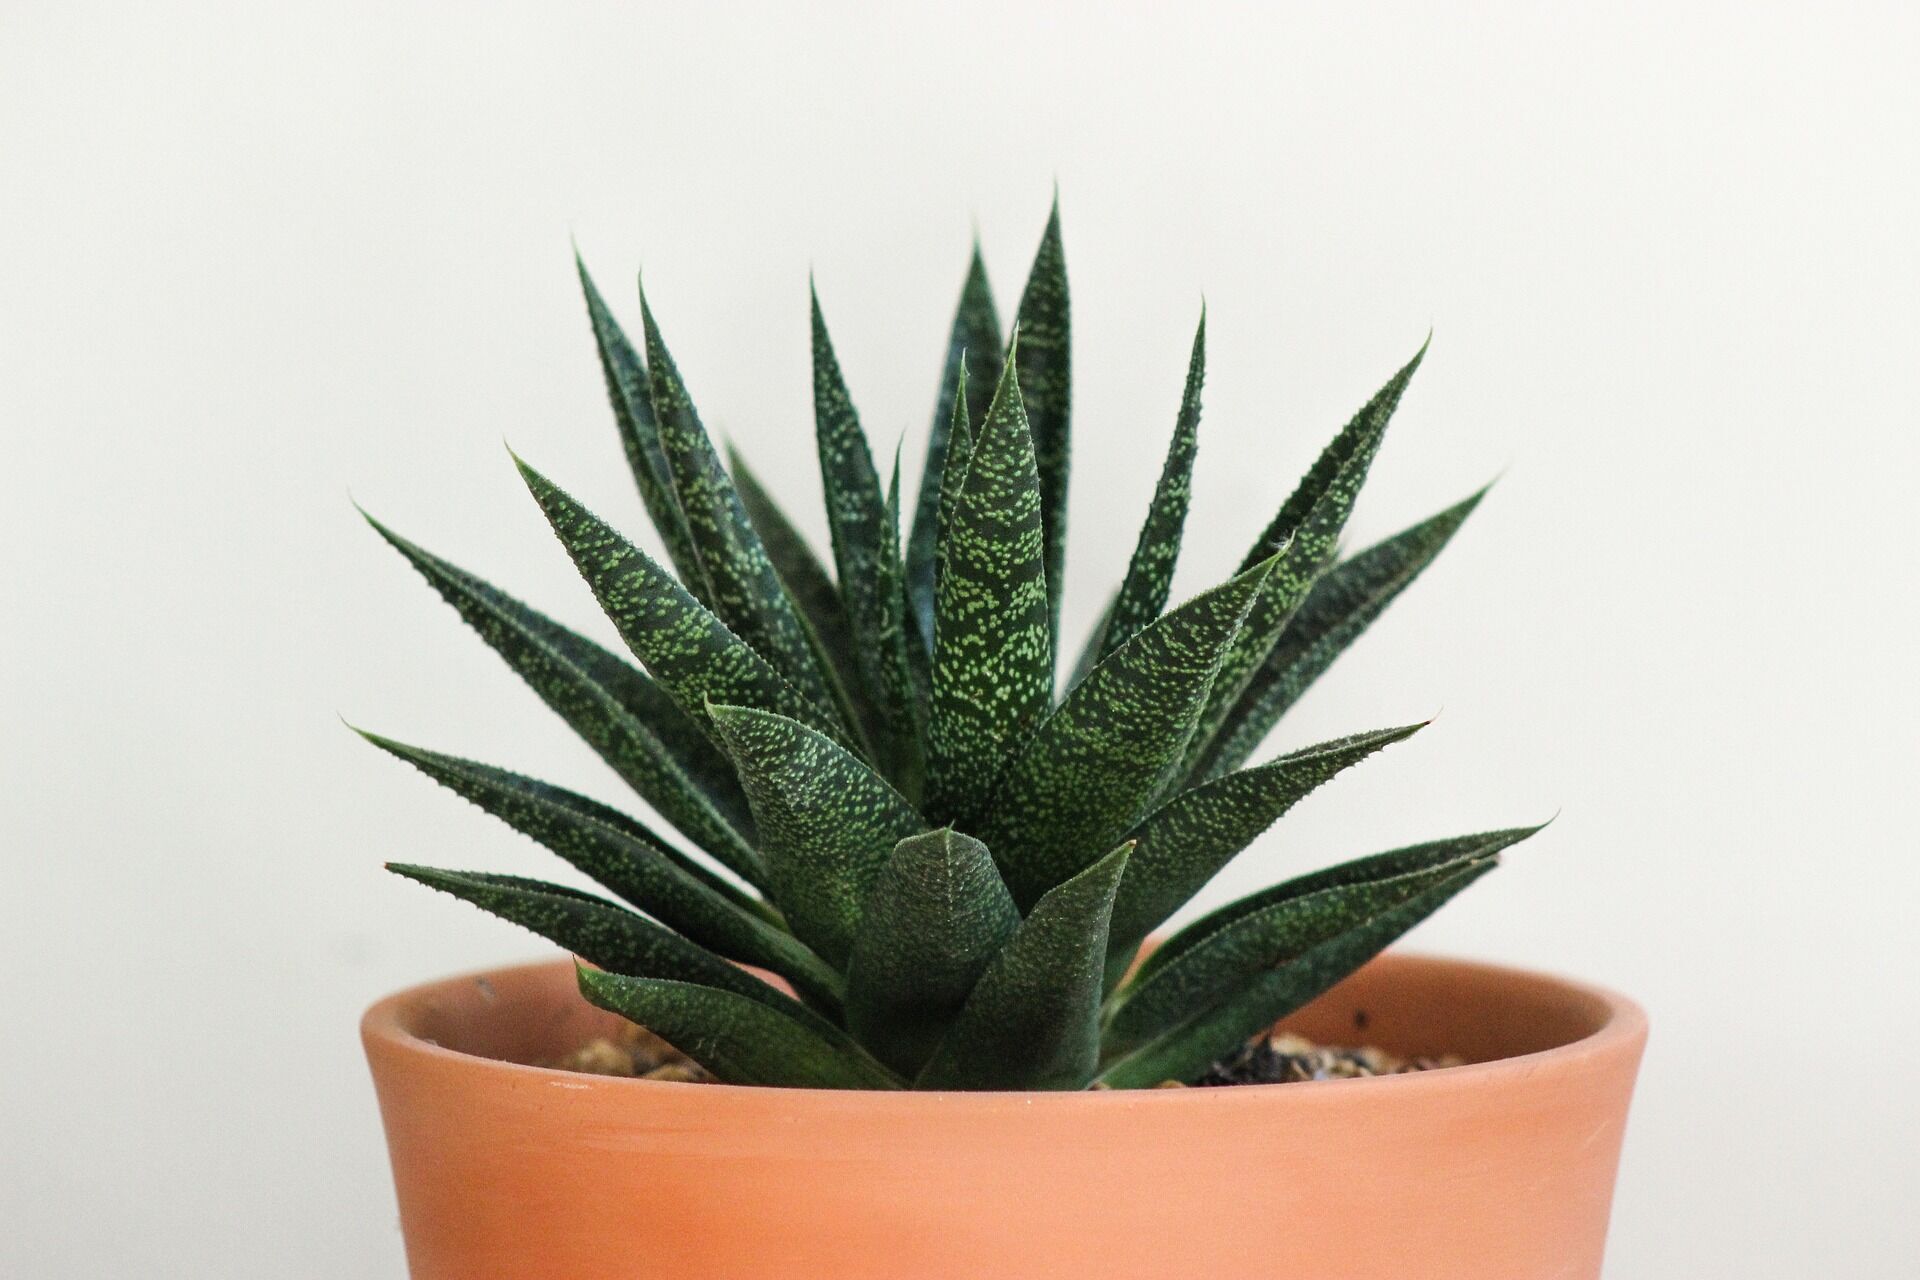 Aloe vera helps to cope with headaches